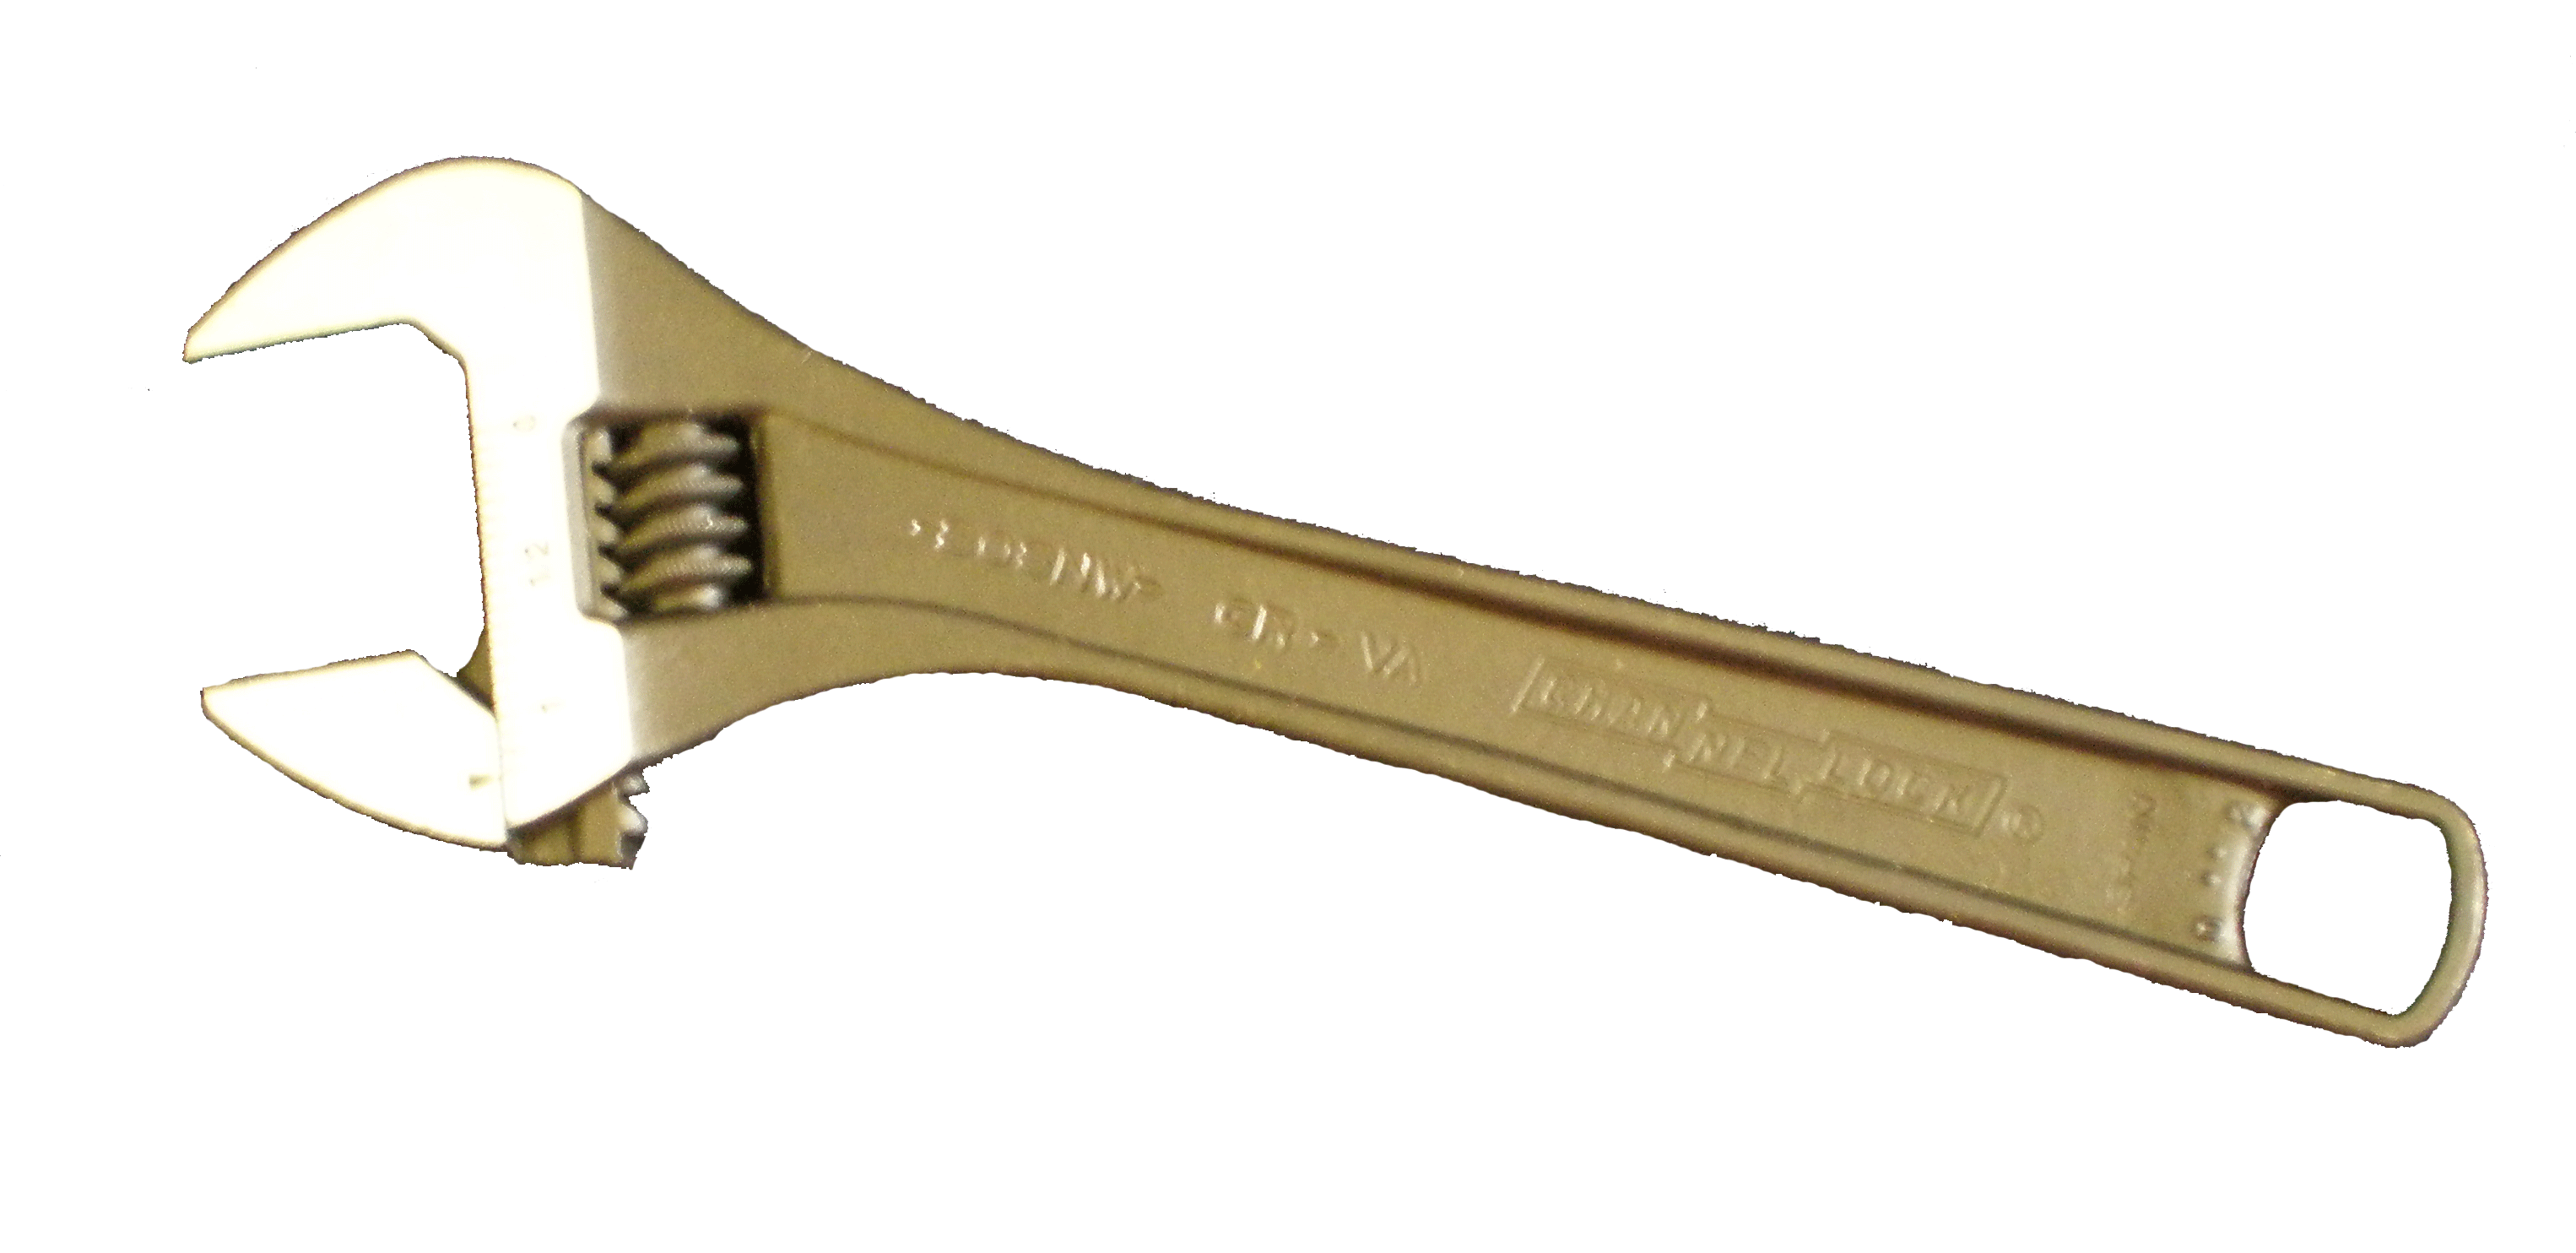 Channellock Wrench